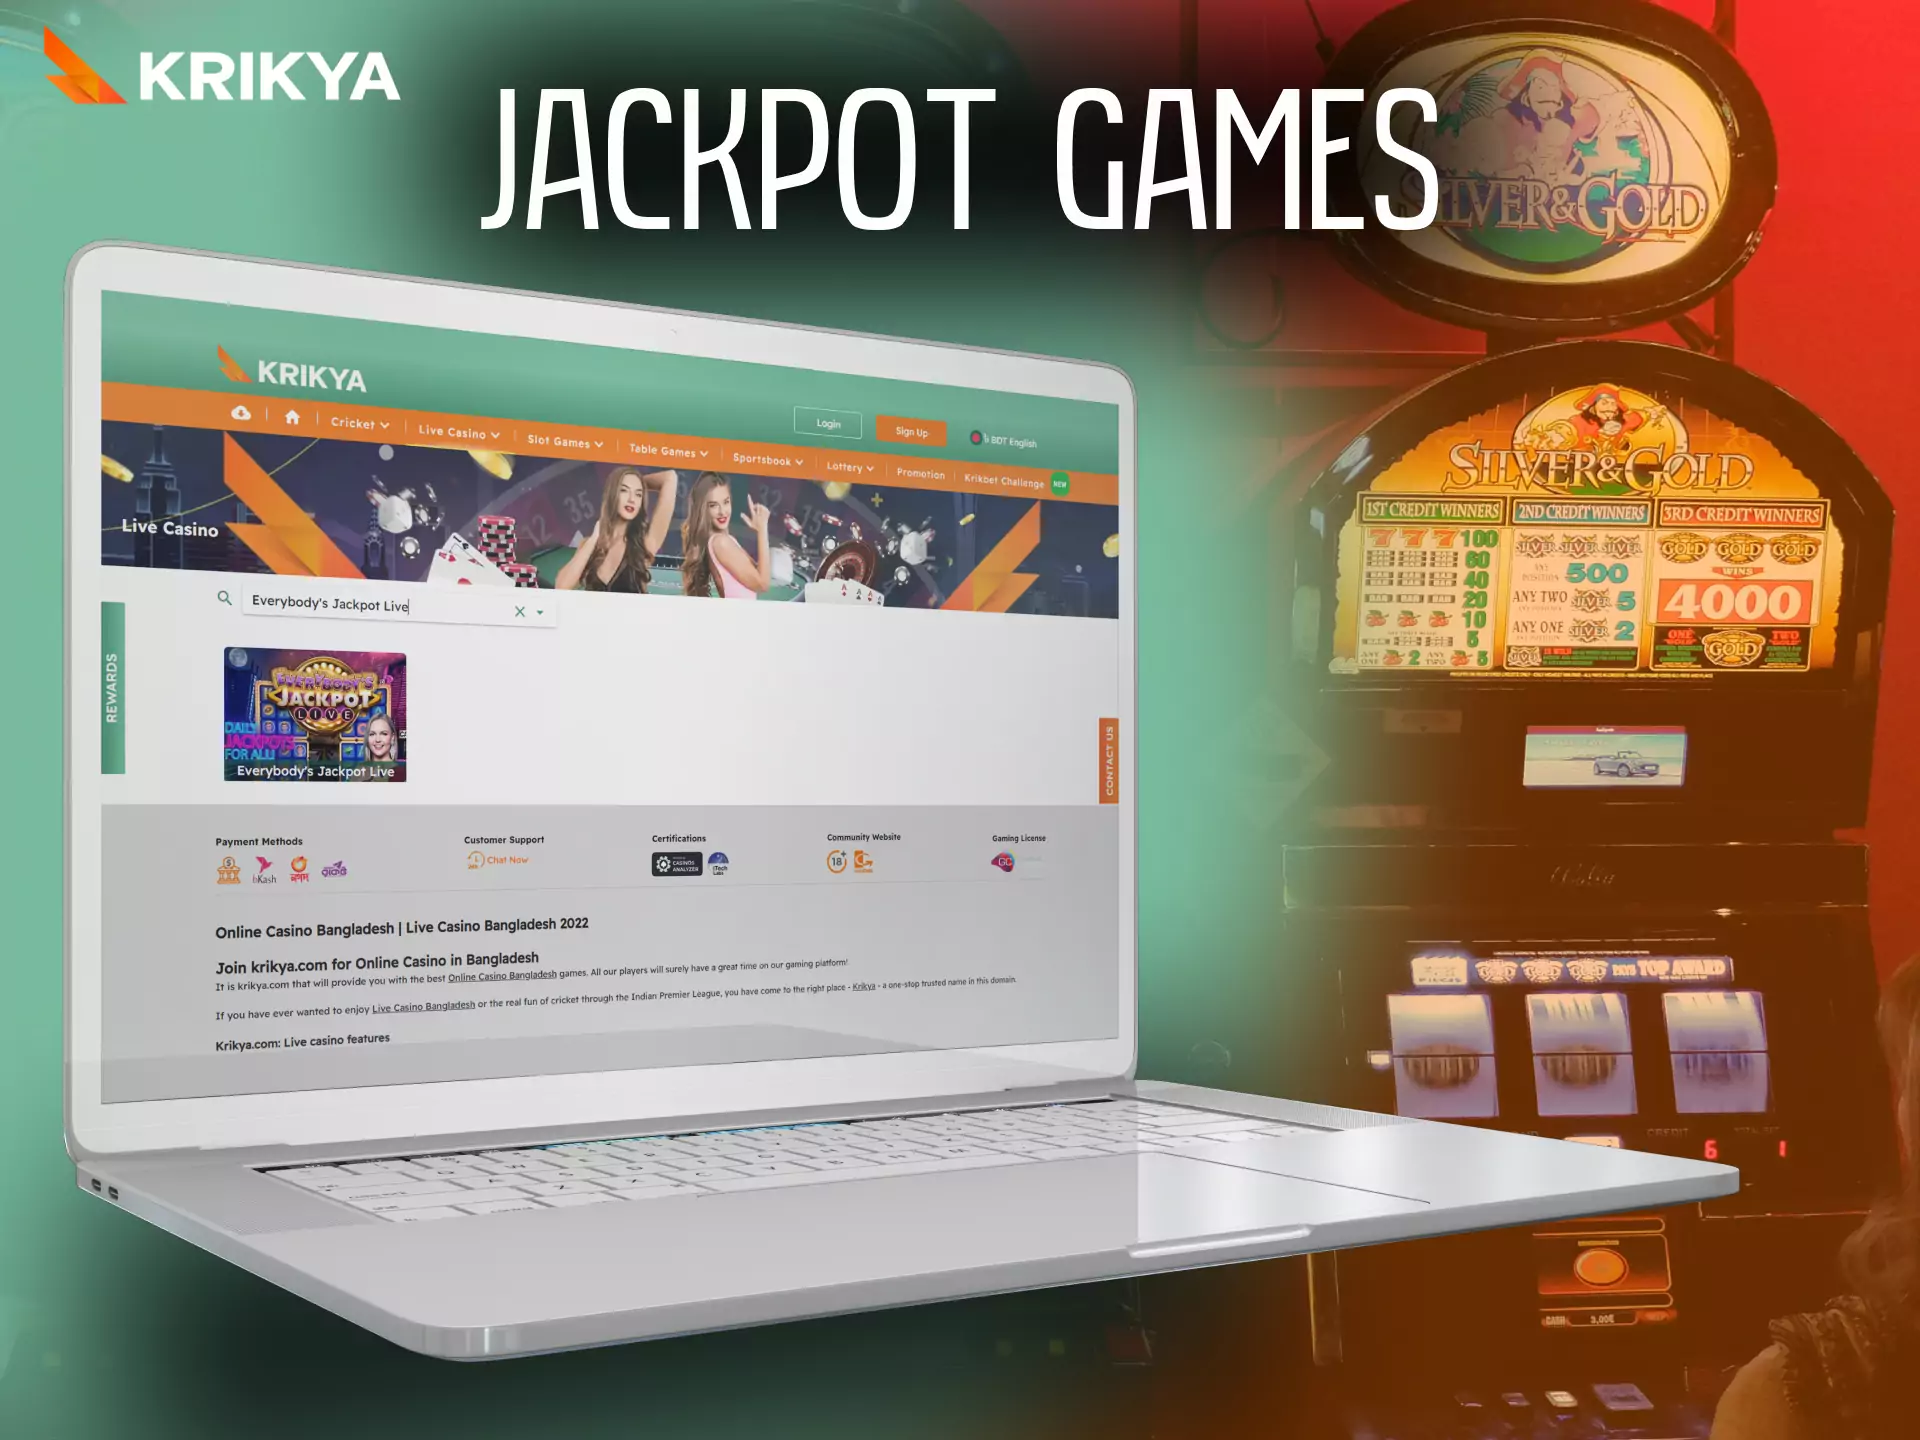 Krikya offers its visitors to play jackpot games.